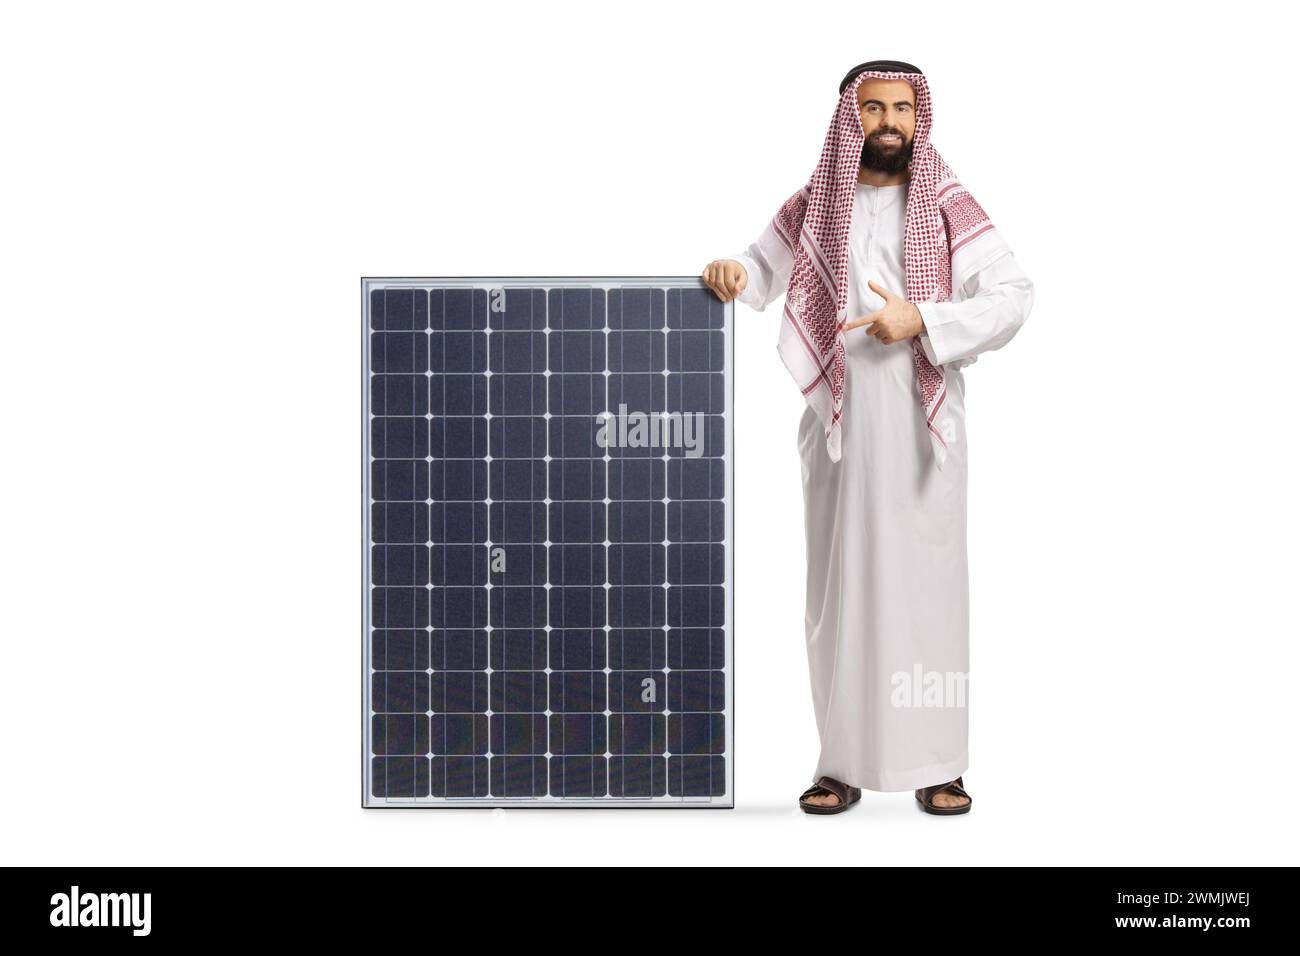 Saudi arab man pointing at a solar panel isolated on white background Stock Photo